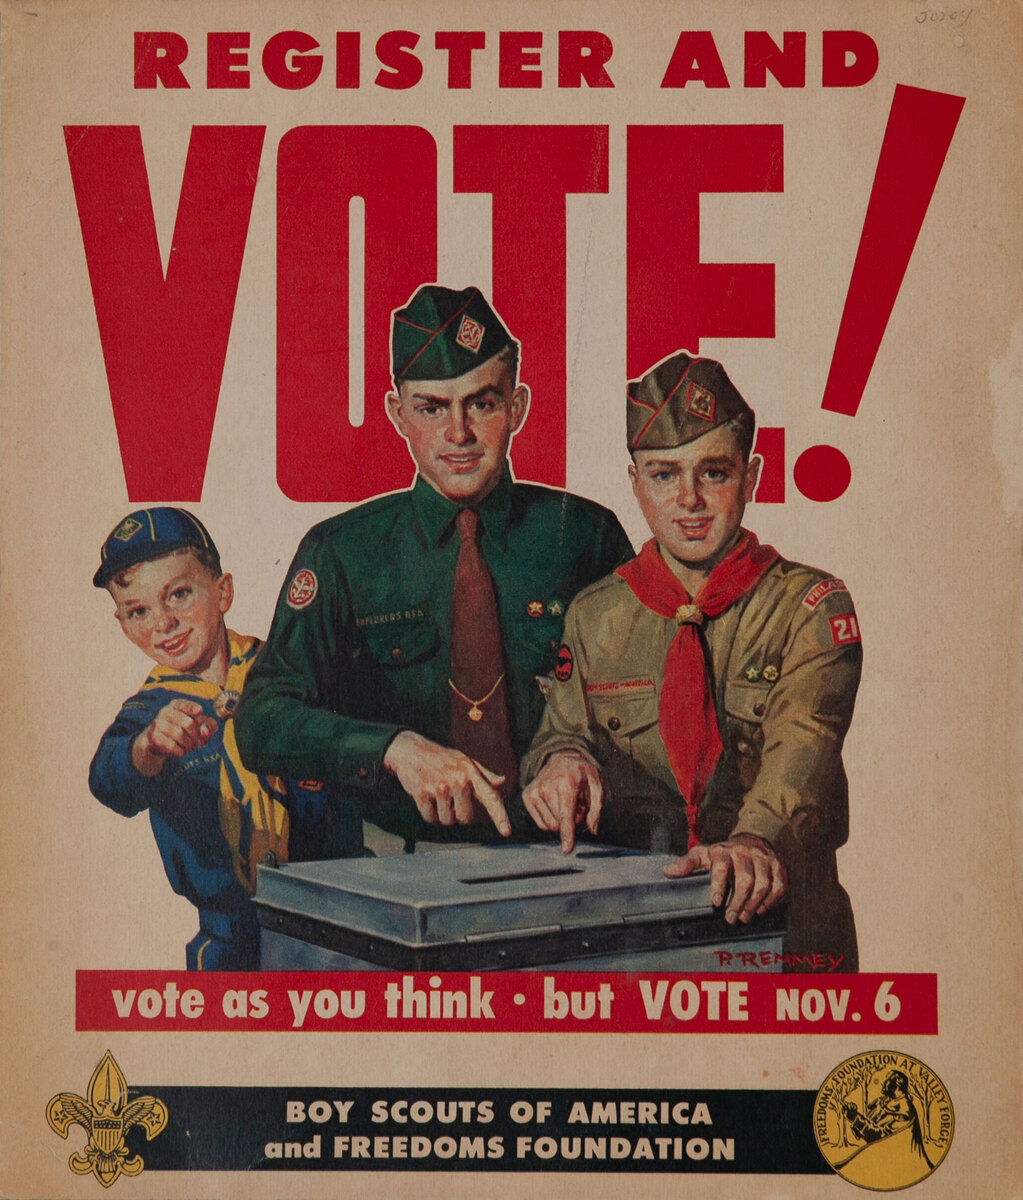 Boy Scouts of America - Register to Vote!